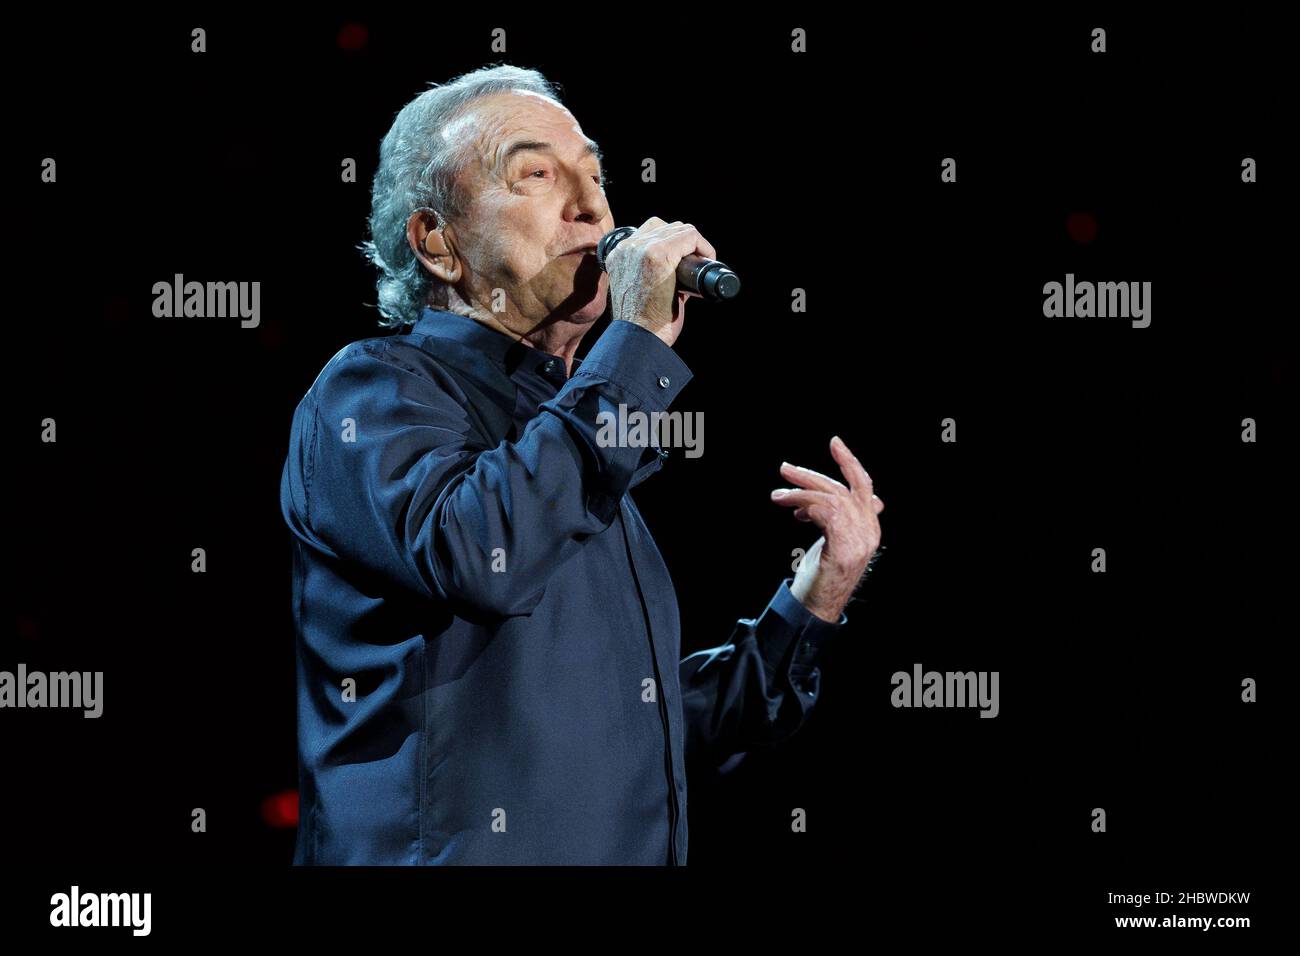 Madrid, Spain. 21st Dec, 2021. Jose Luis Perales the singer seen during his performance at the concert at the Wizink Center. (Photo by Atilano Garcia/SOPA Images/Sipa USA) Credit: Sipa USA/Alamy Live News Stock Photo